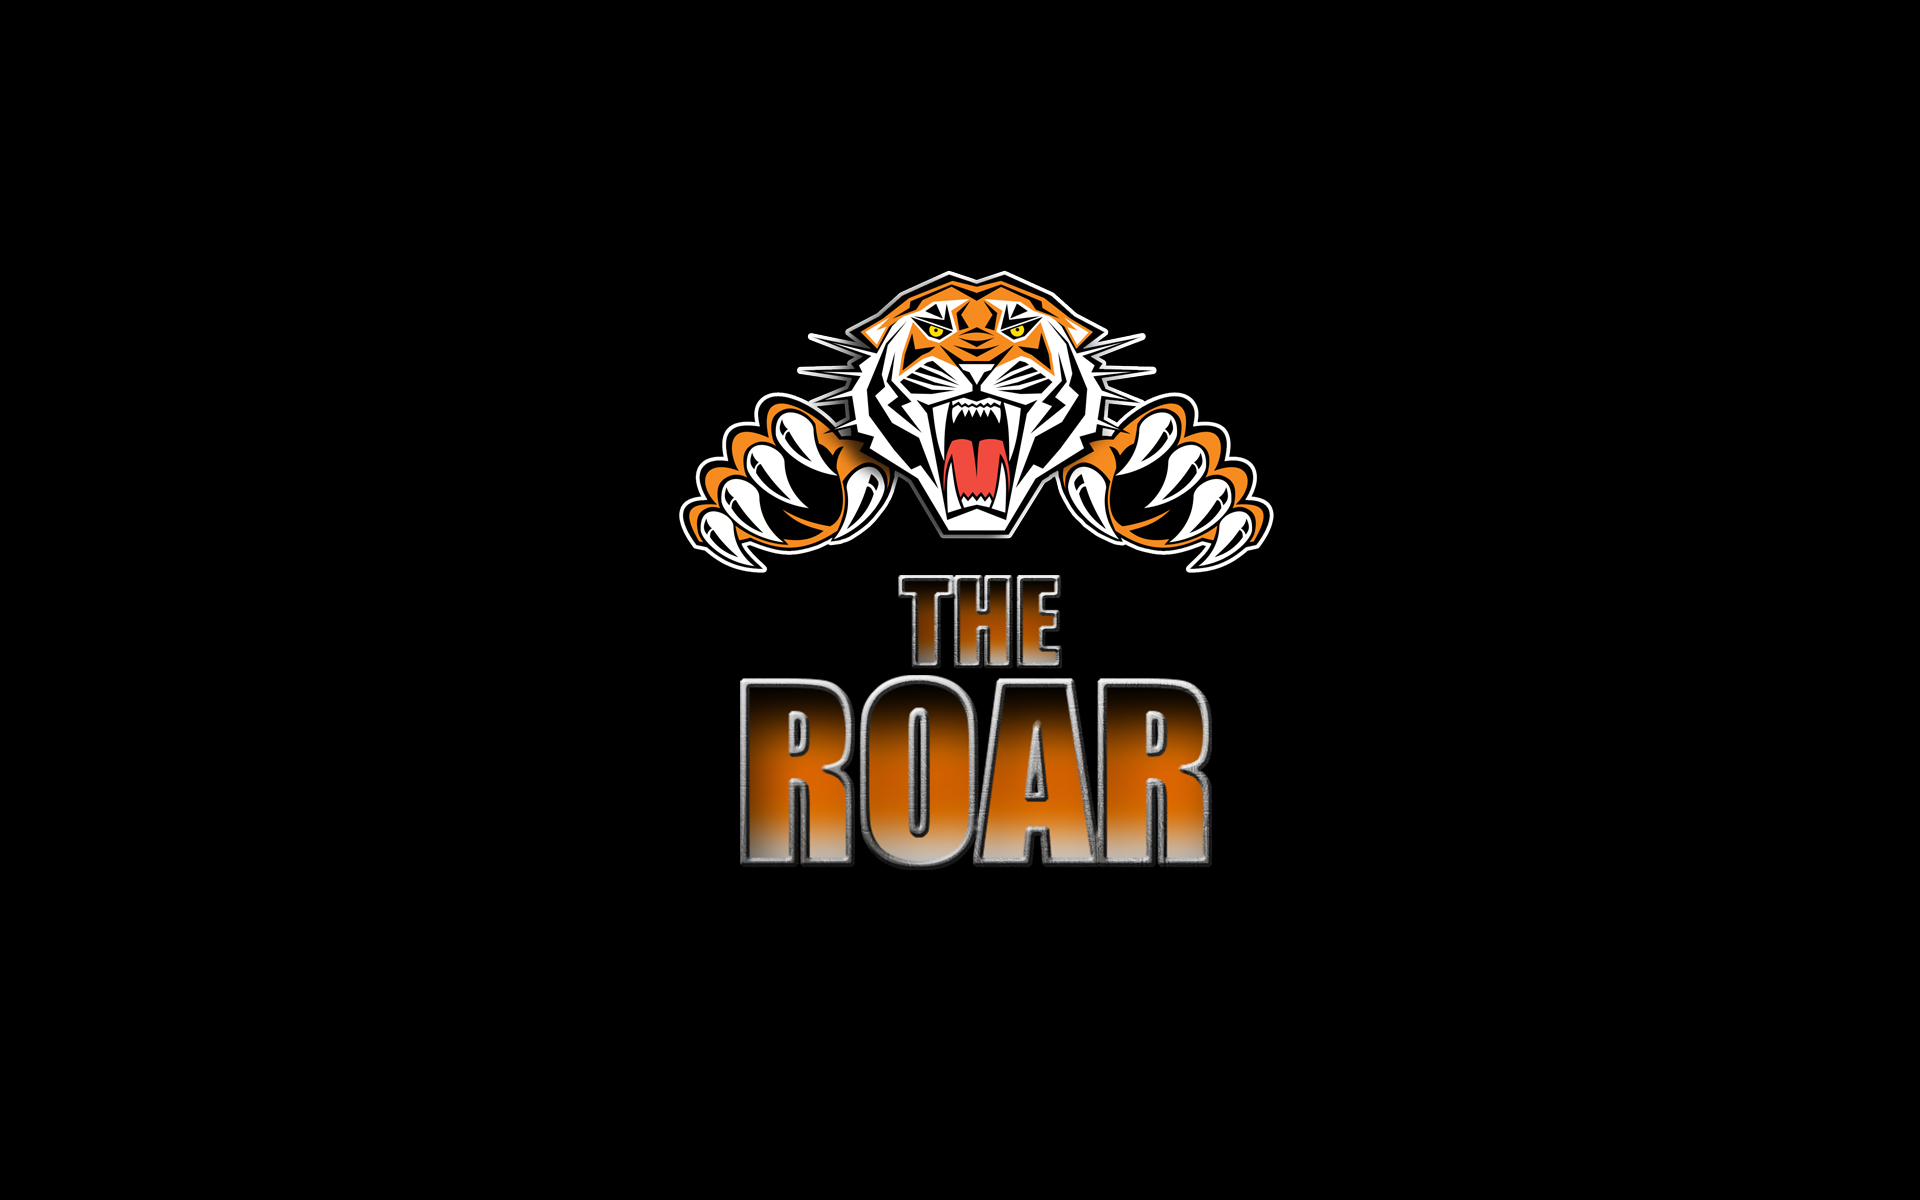 wests tigers, sports, logo, national rugby league, nrl, rugby